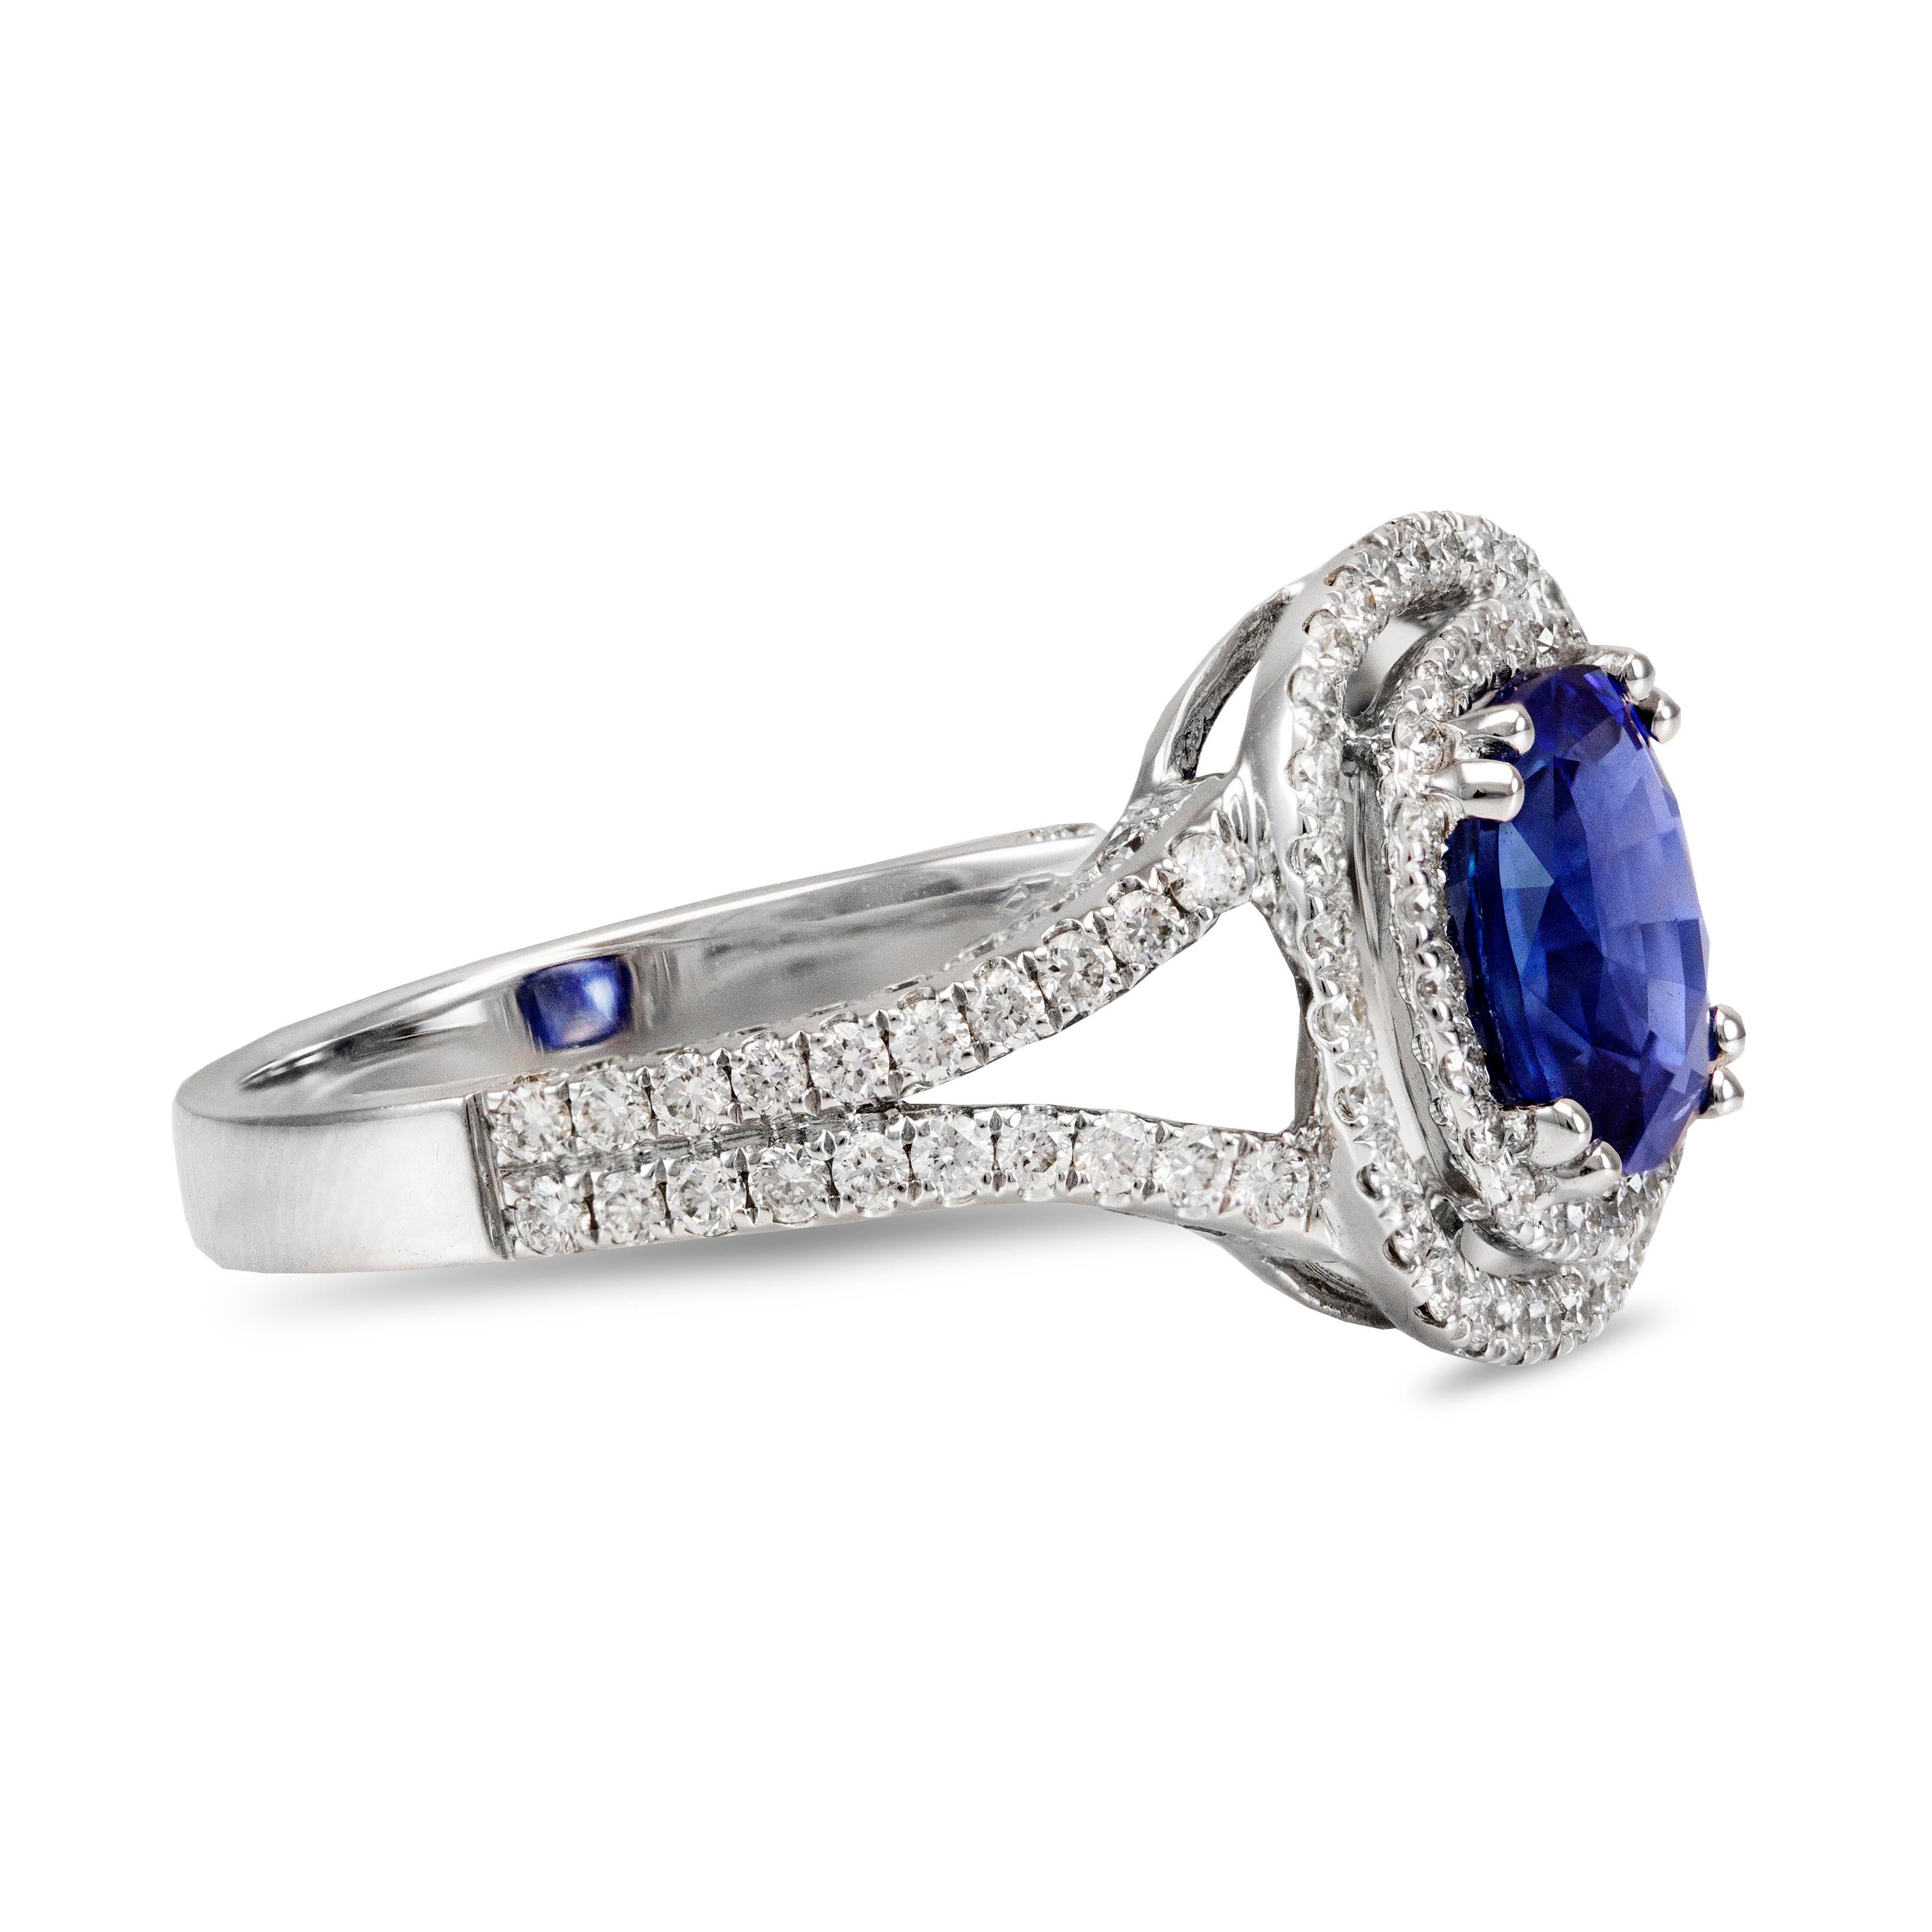 This elegant and stunning engagement ring features a cushion-cut natural sapphire center stone, deep blue color, weighing 2.06 carats total. Accented by 2 rows of brilliant round diamonds weighing 0.78 carats total. Made with 18K White Gold. Size